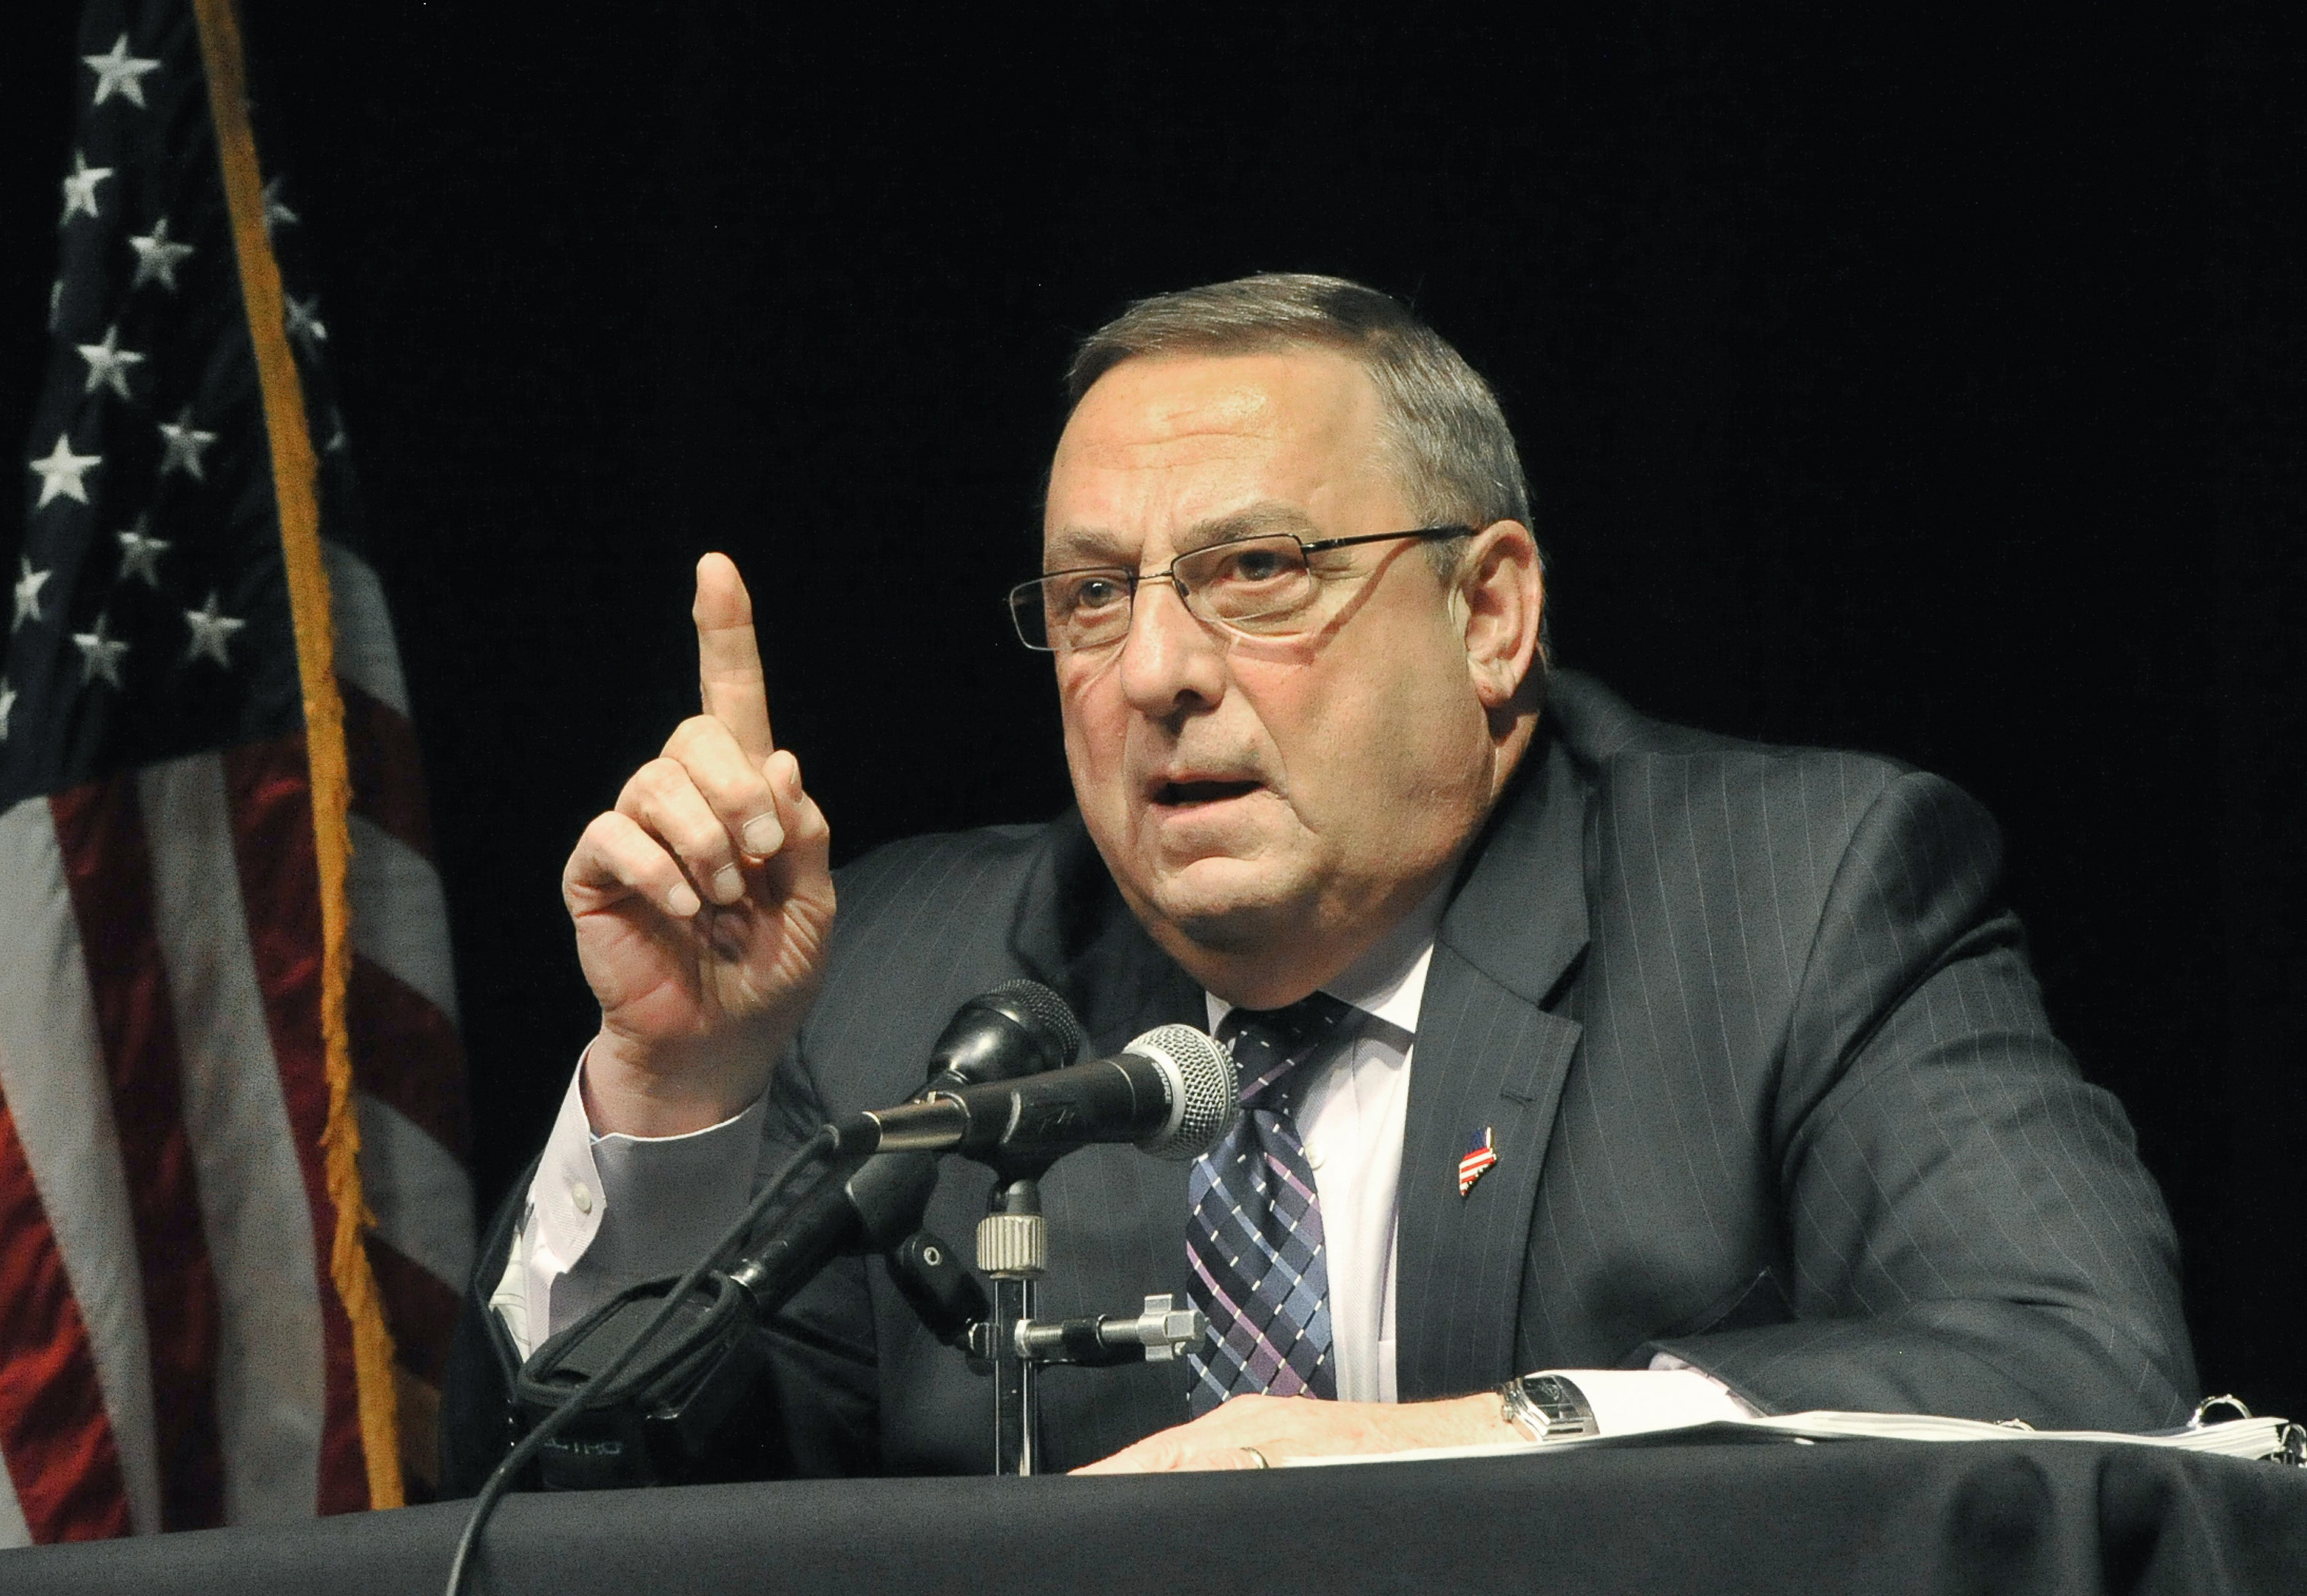 Maine Governor Paul LePage holds a Town Hall Meeting to discuss his tax reform plan at Thornton Academy in Saco. (Portland Press Herald—Press Herald via Getty Images)